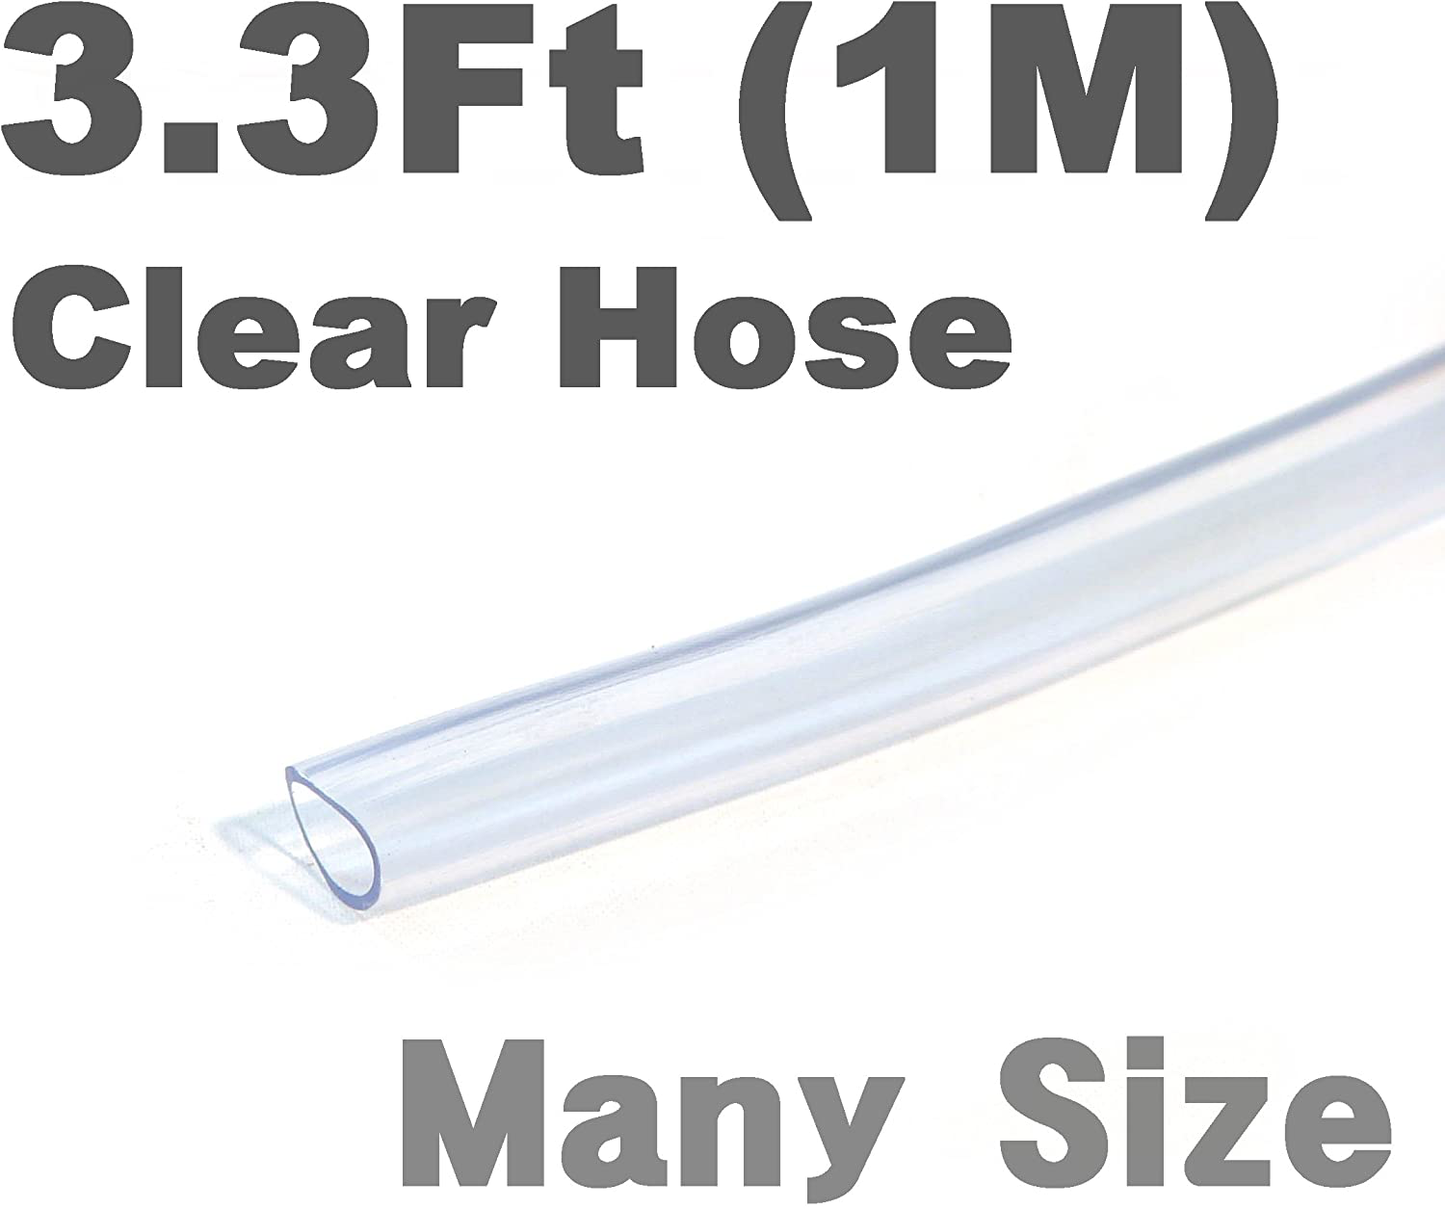 SMI Inner 1/5" Outer 5/16" 3.3 Ft 1 Metre PVC Clear Tubing Flexible Air Food Water Delivery Feeding Hose Garden Pond Aquarium